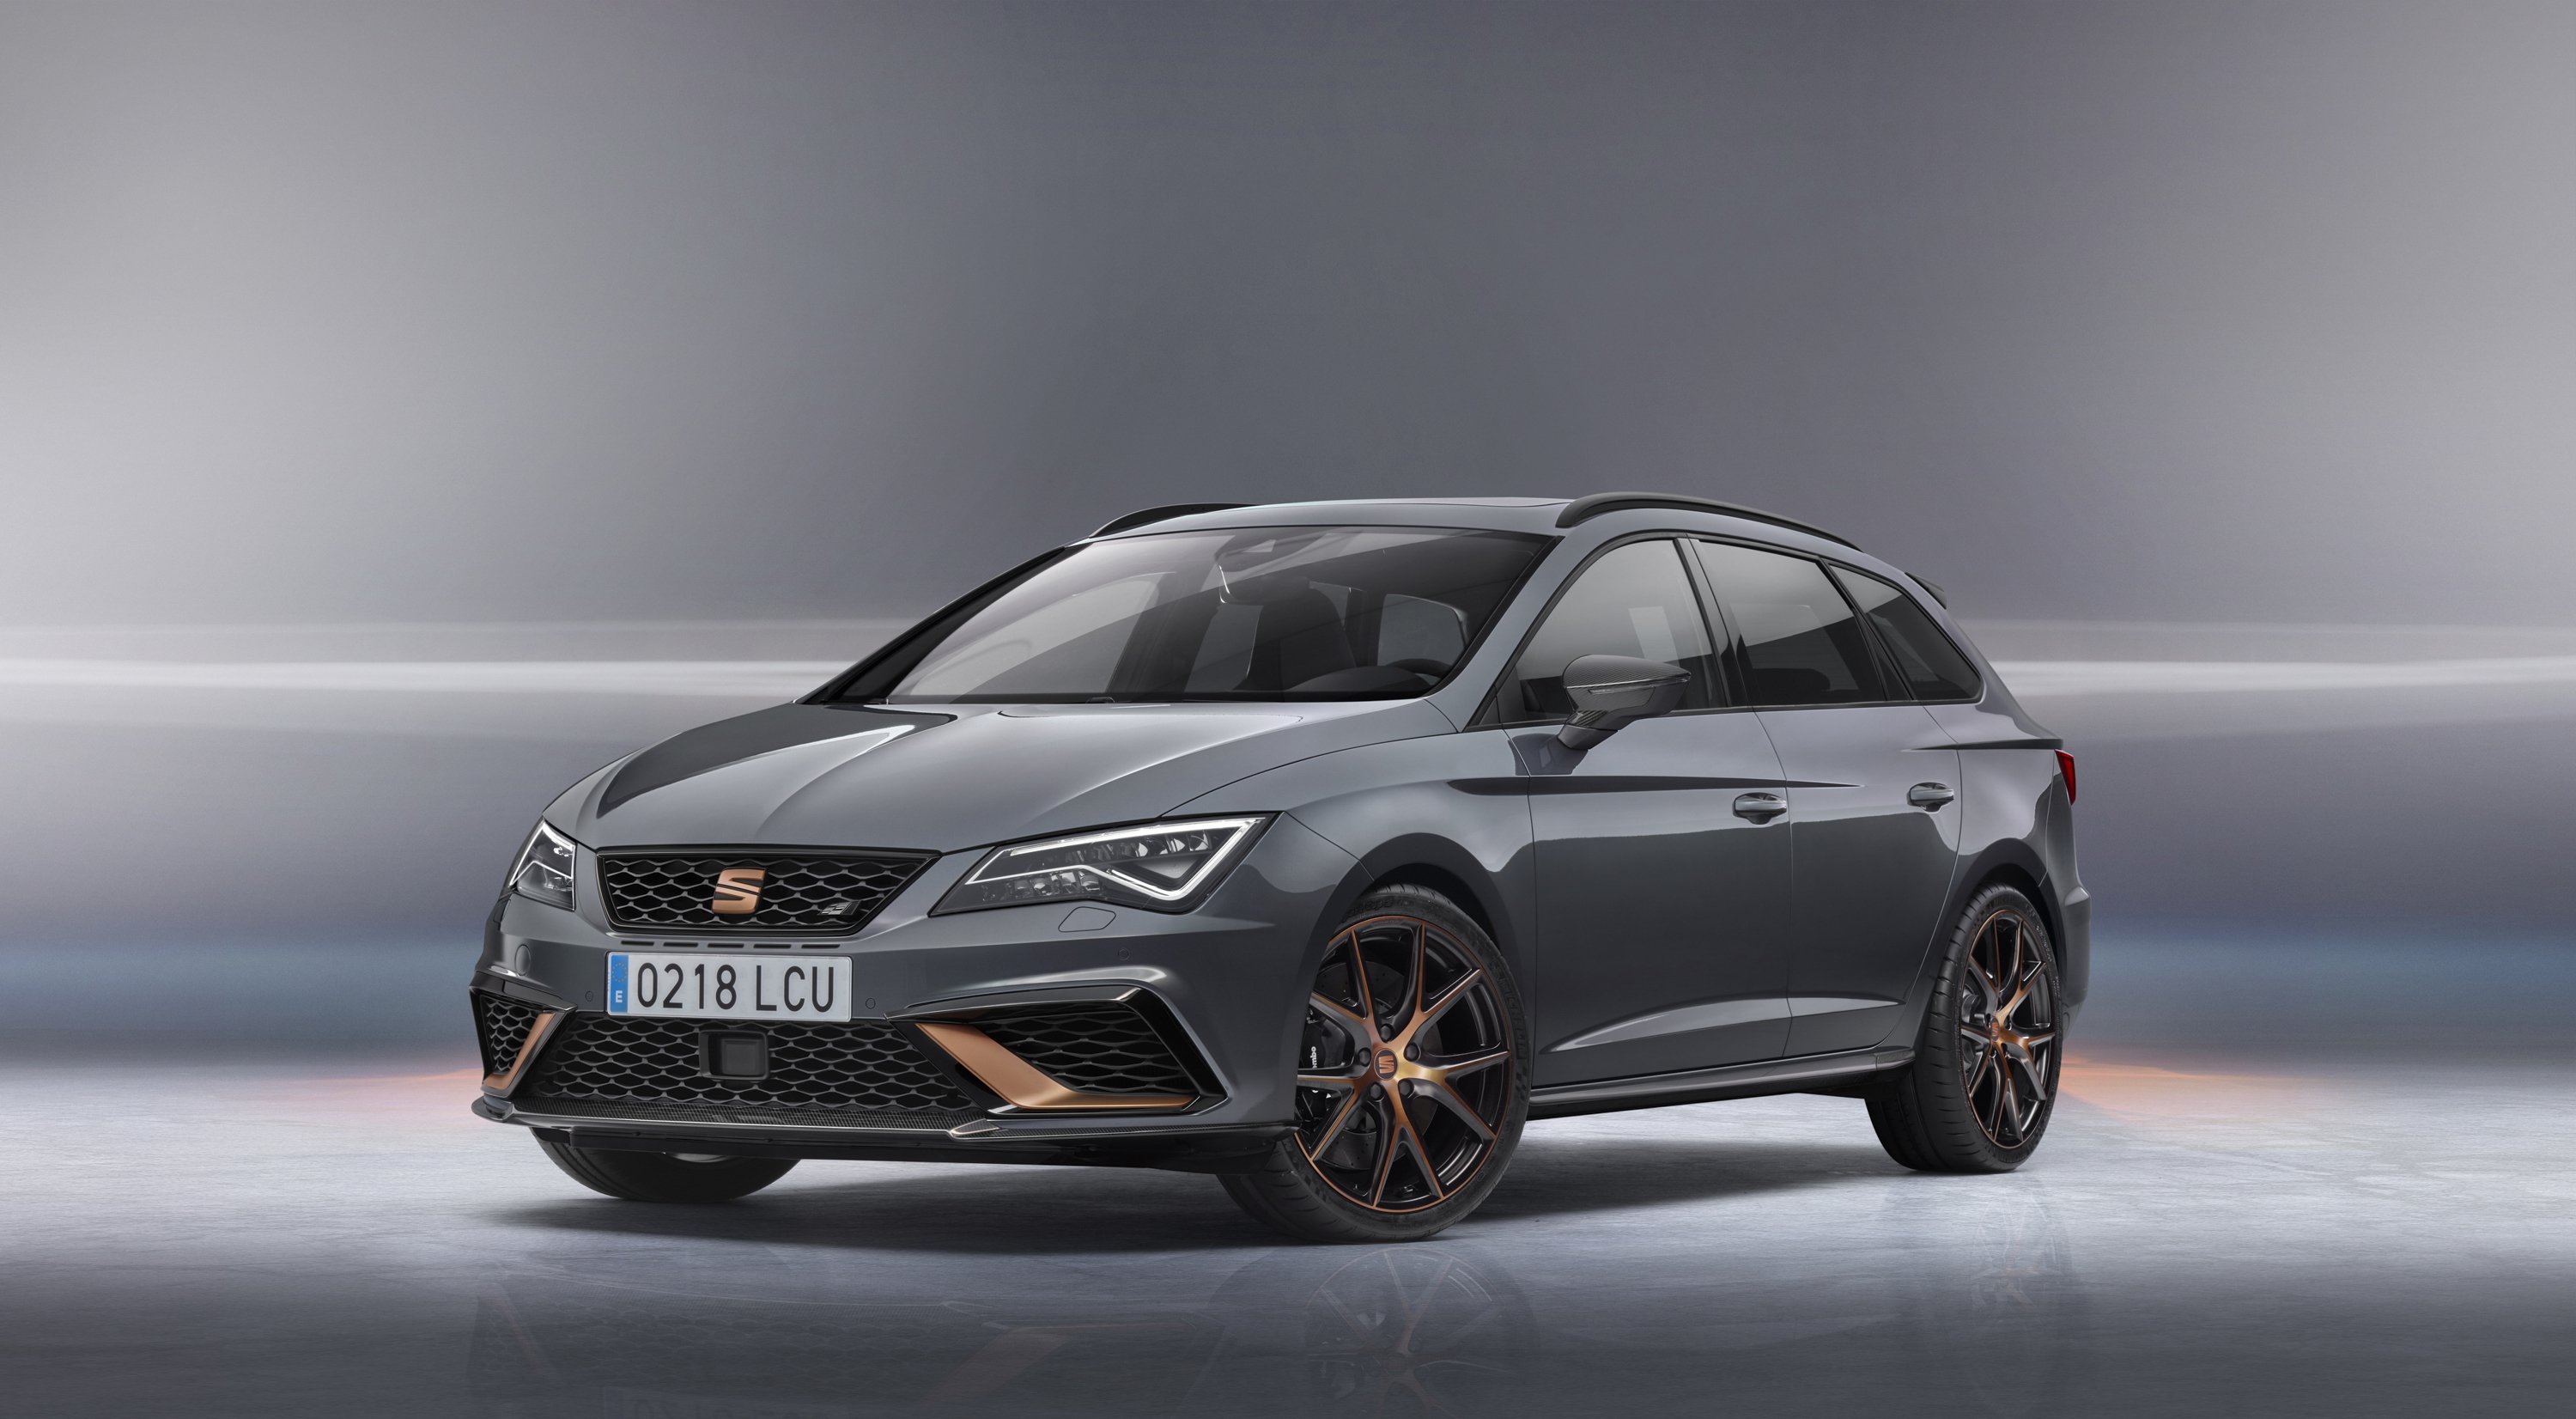 2018 Seat Leon Cupra R St Pictures, Photos, Wallpapers , HD Wallpaper & Backgrounds